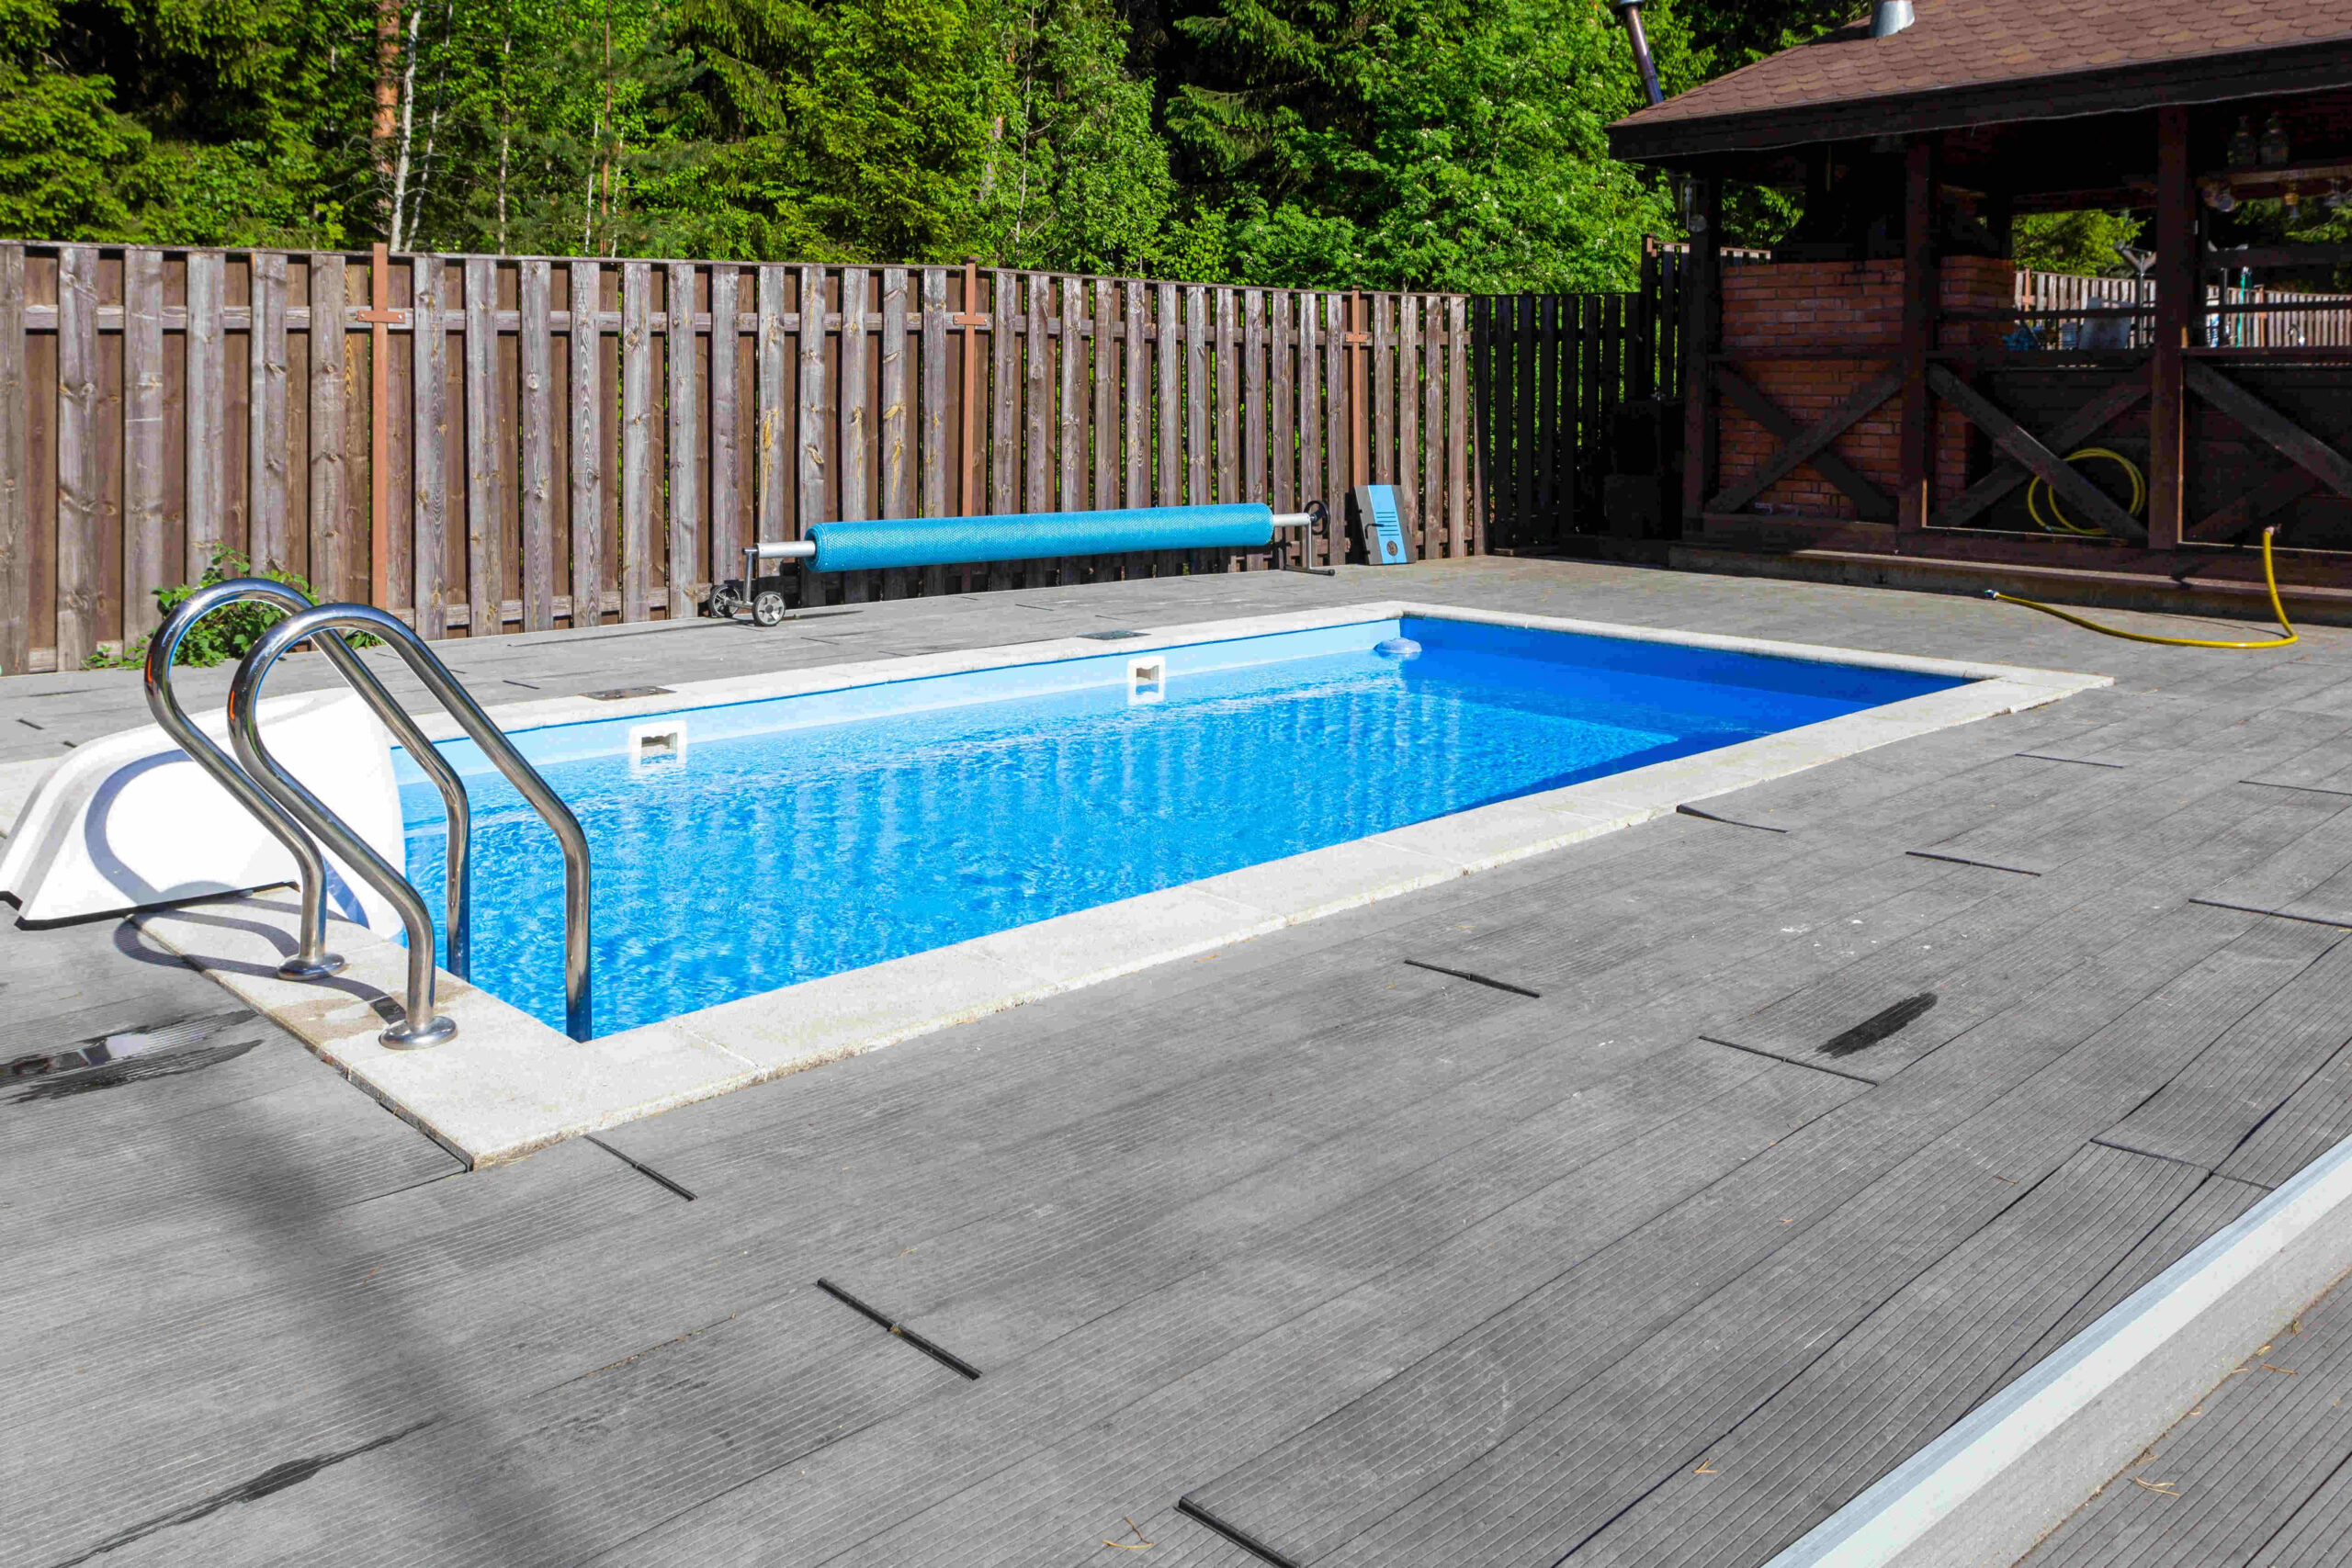 An Inground Pool In A Small Backyard, What Is Considered A Small Inground Pool